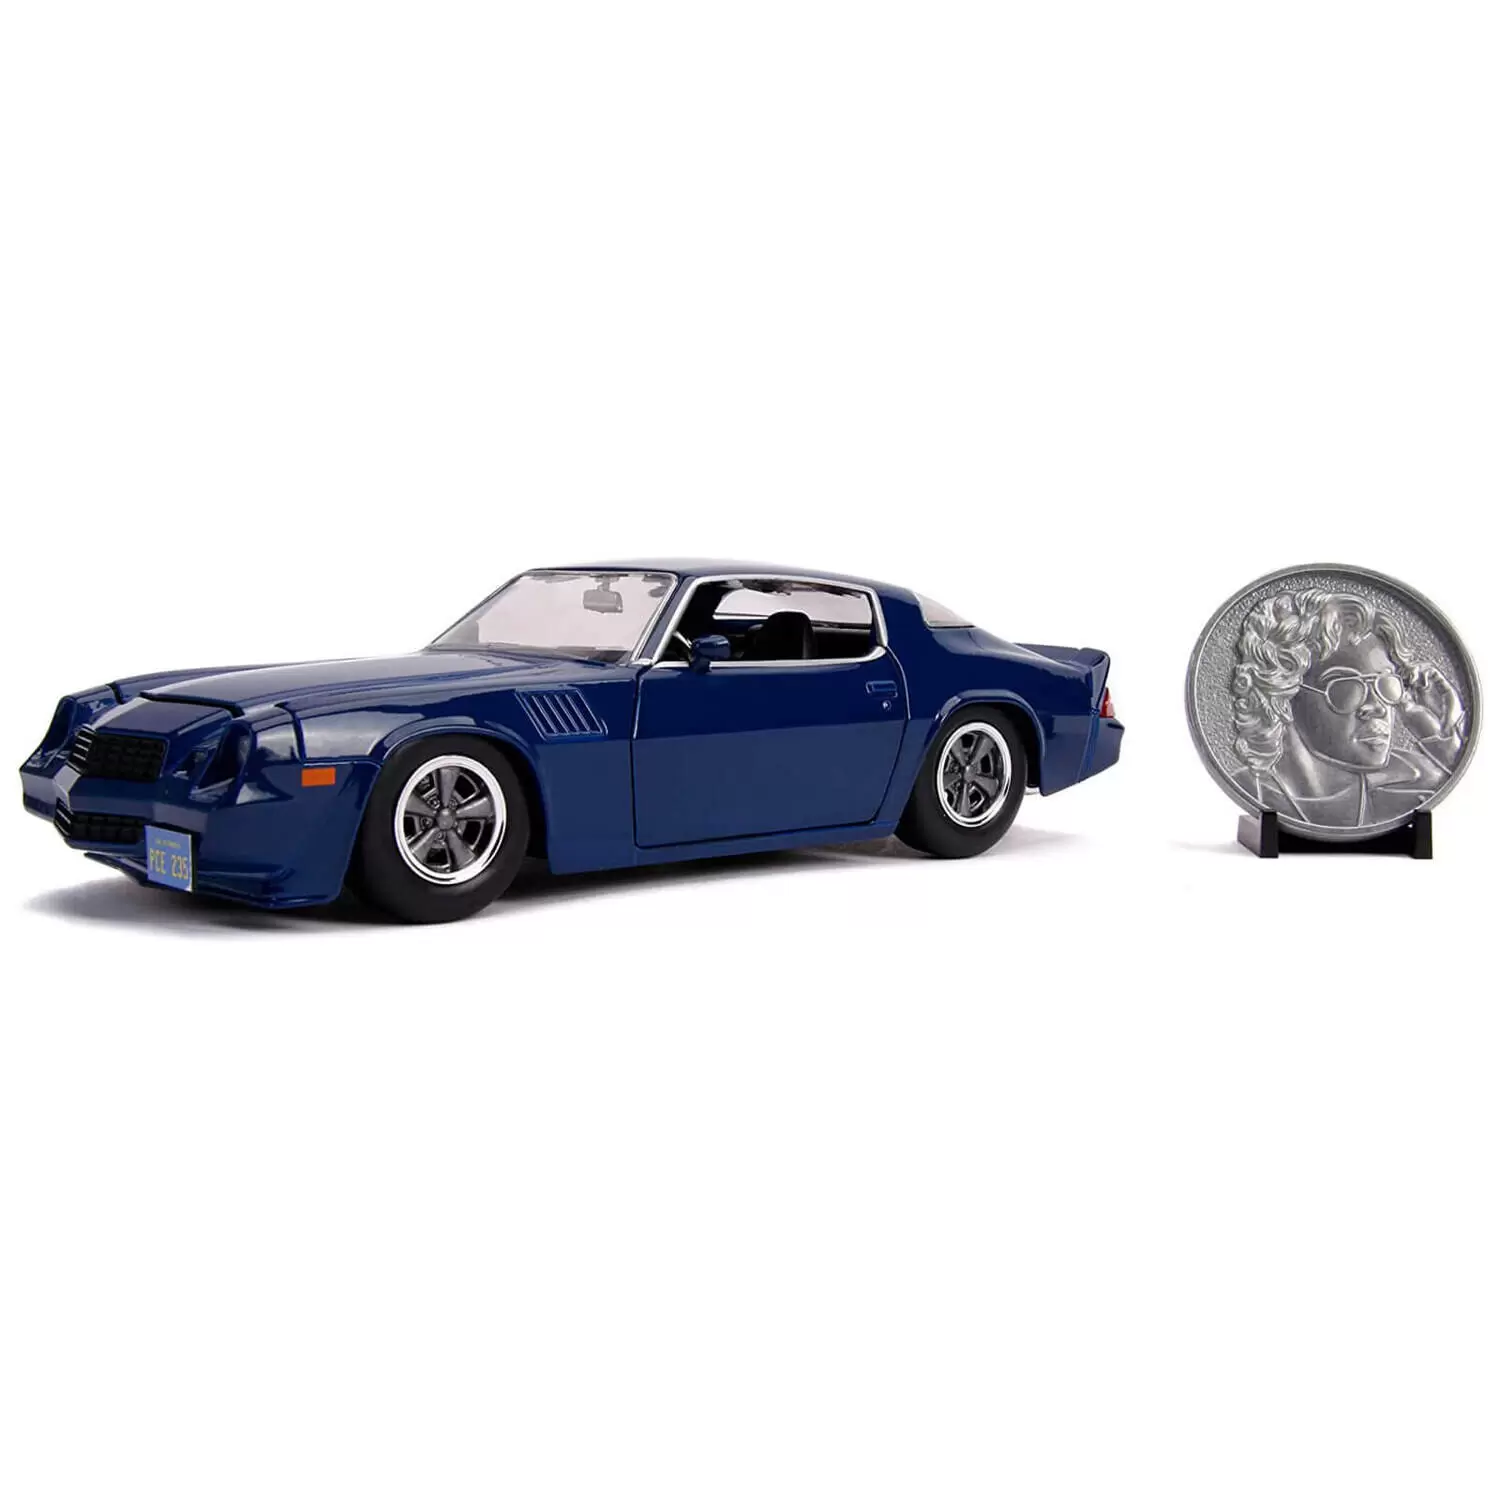 Jada Toys Hollywood Rides - Billy\'s Chevy Camaro Z28 with Collectible Coin -  Stranger Things - 1979 Chevy Camaro Z28 - 1:24